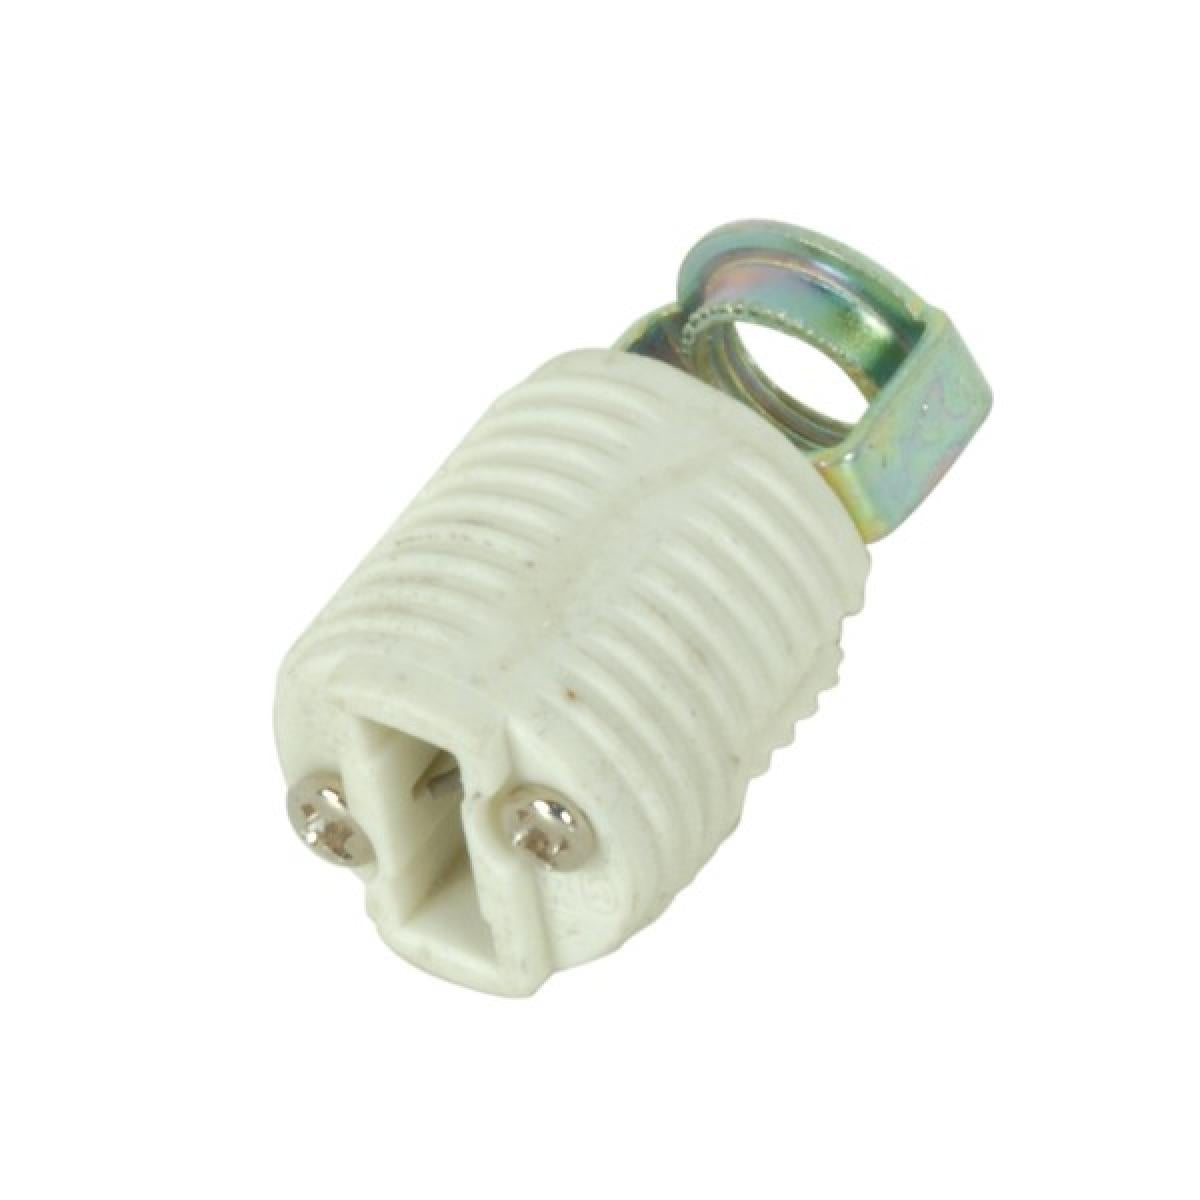 Satco 80-1582 Threaded G-9 Porcelain Socket Push-In Terminals 1/8 IP Hickey Inside Extrusion Double Leg 660W 250V